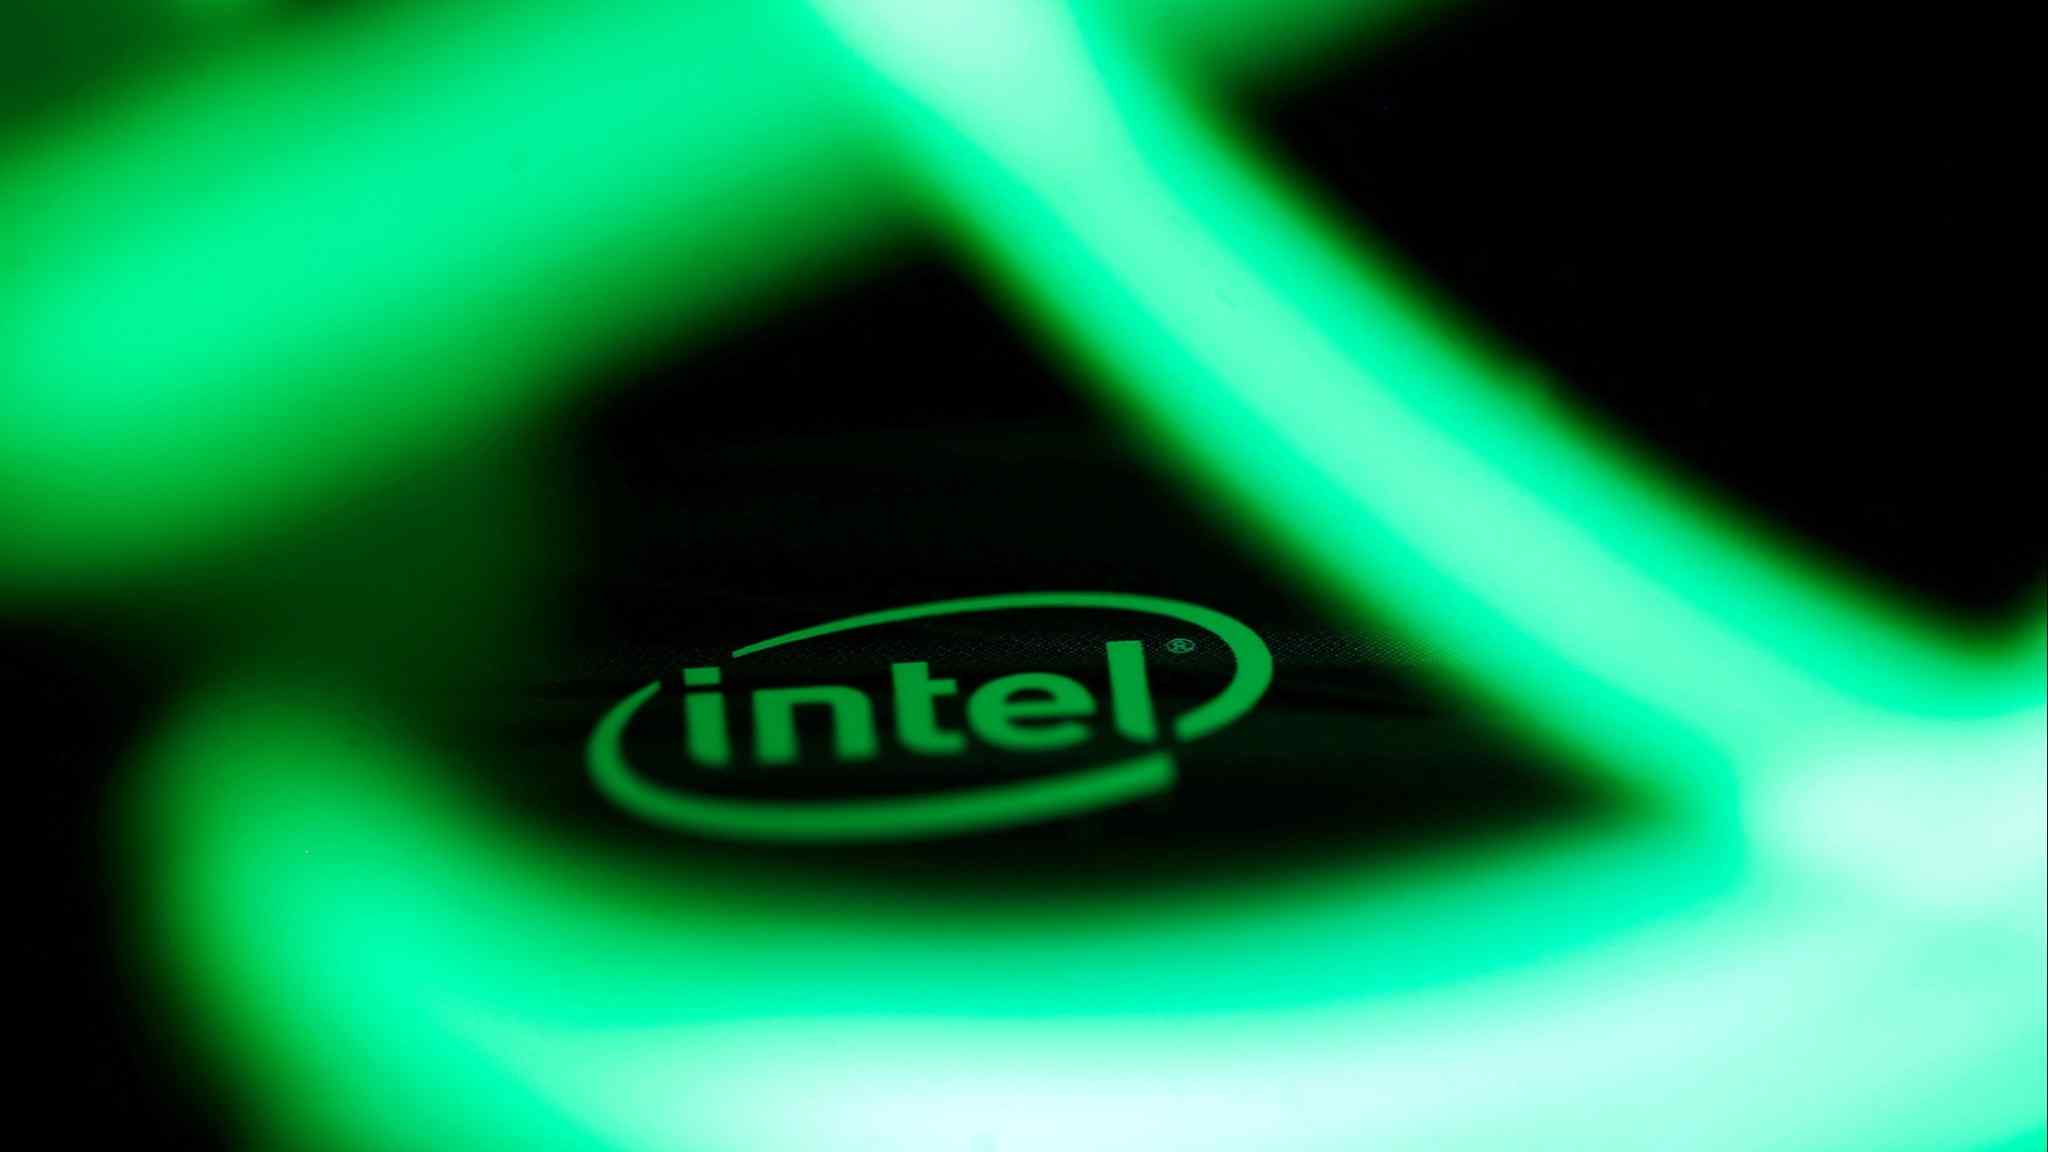 Intel’s weak guidance points to more trouble ahead for US chipmaker